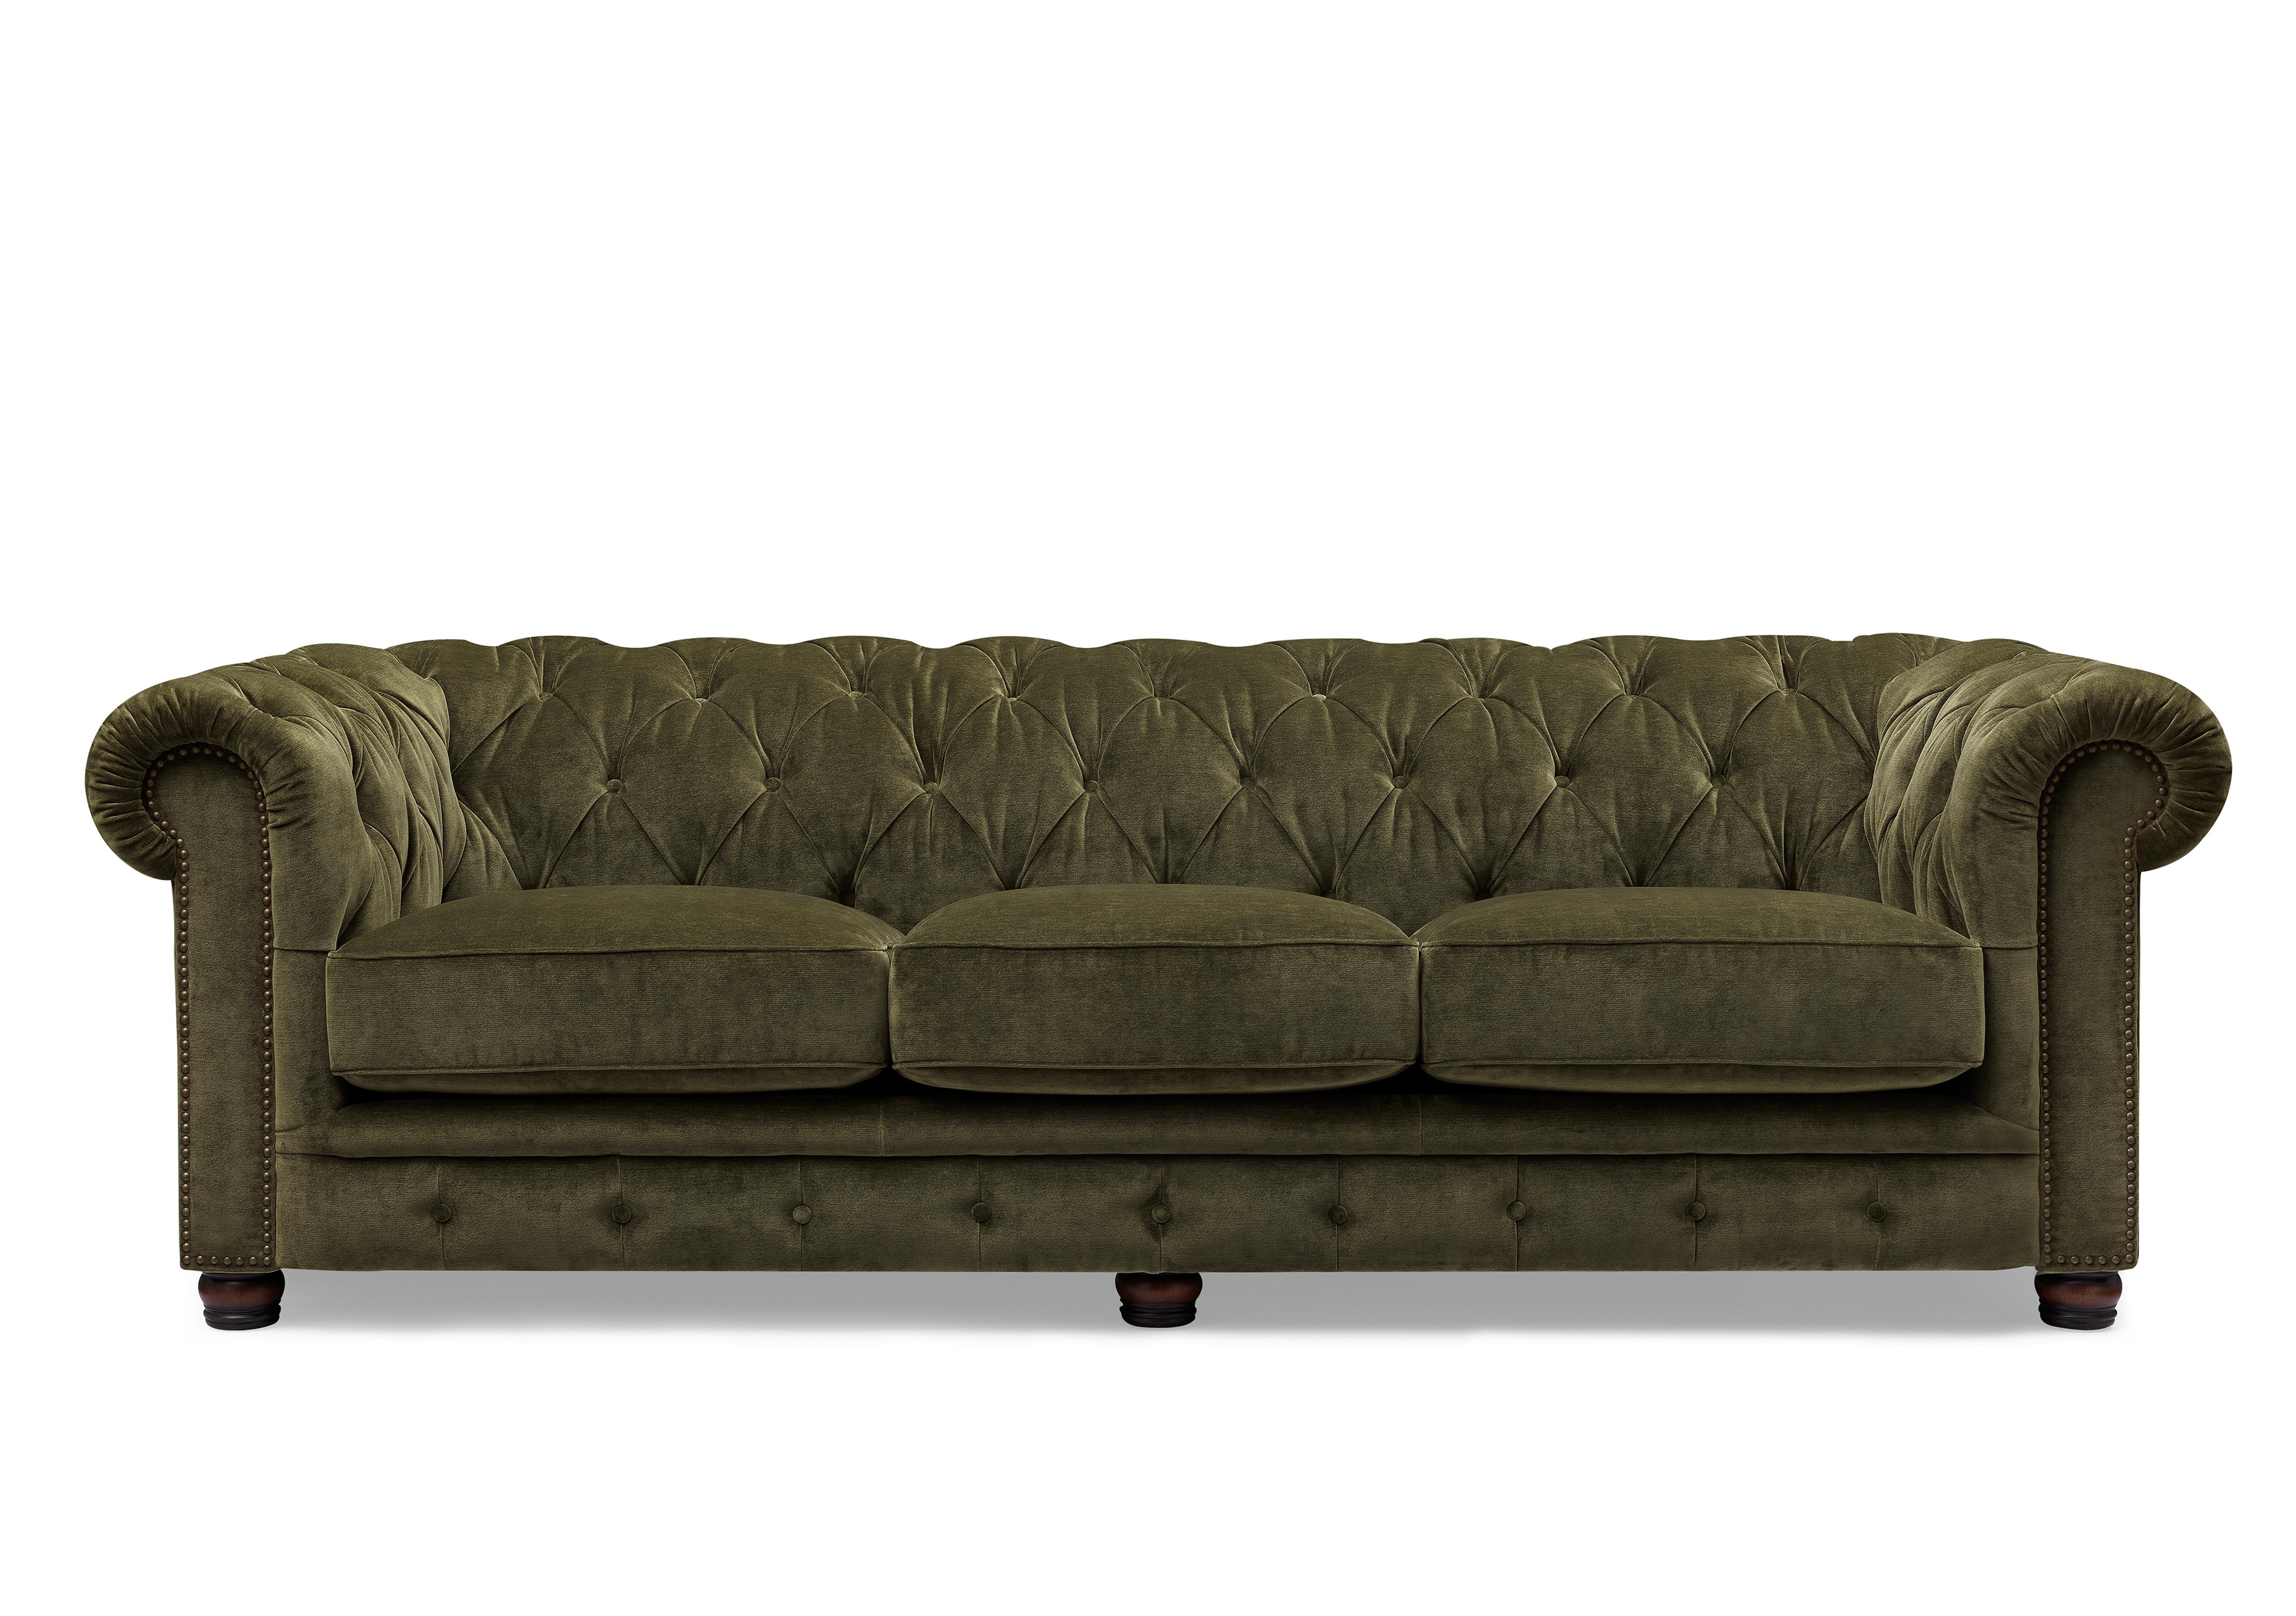 Shackleton 4 Seater Fabric Chesterfield Sofa in X3y1-W018 Pine on Furniture Village